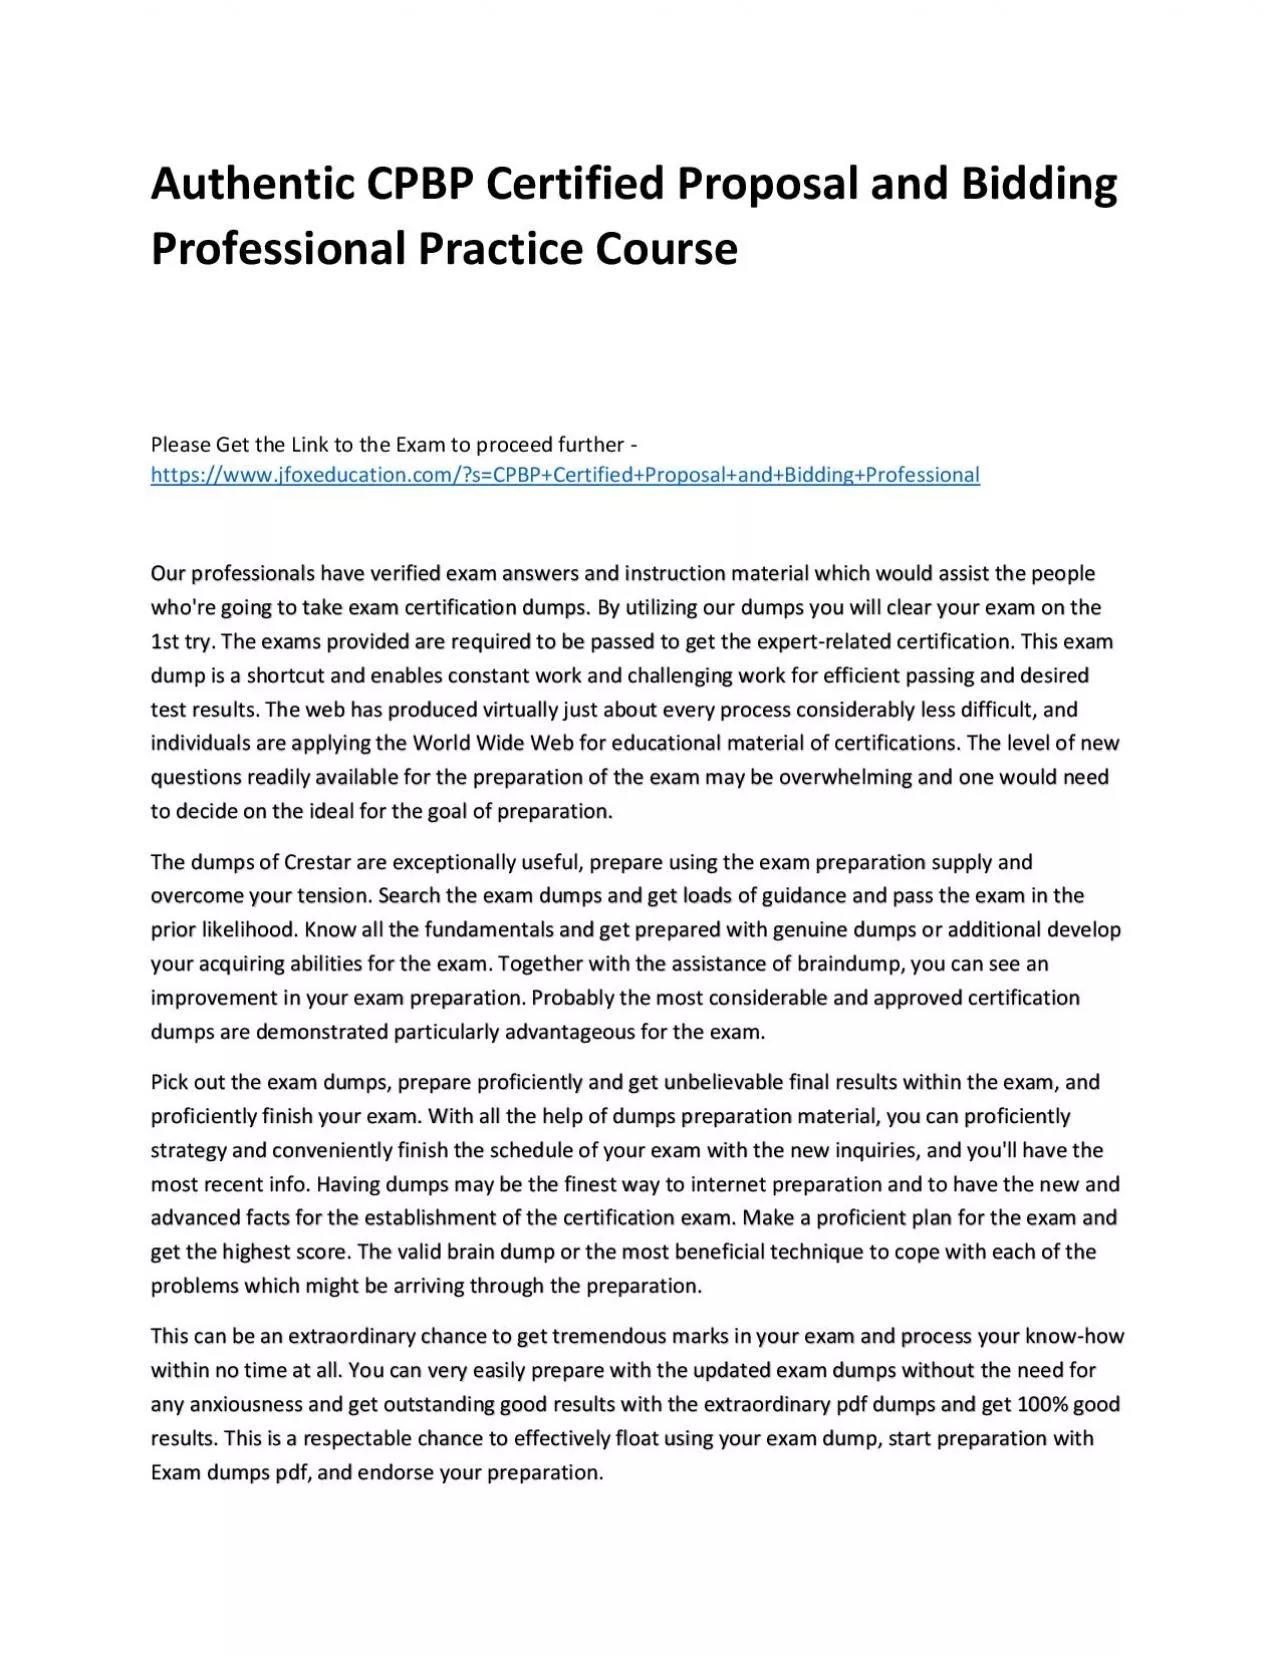 Authentic CPBP Certified Proposal and Bidding Professional Practice Course